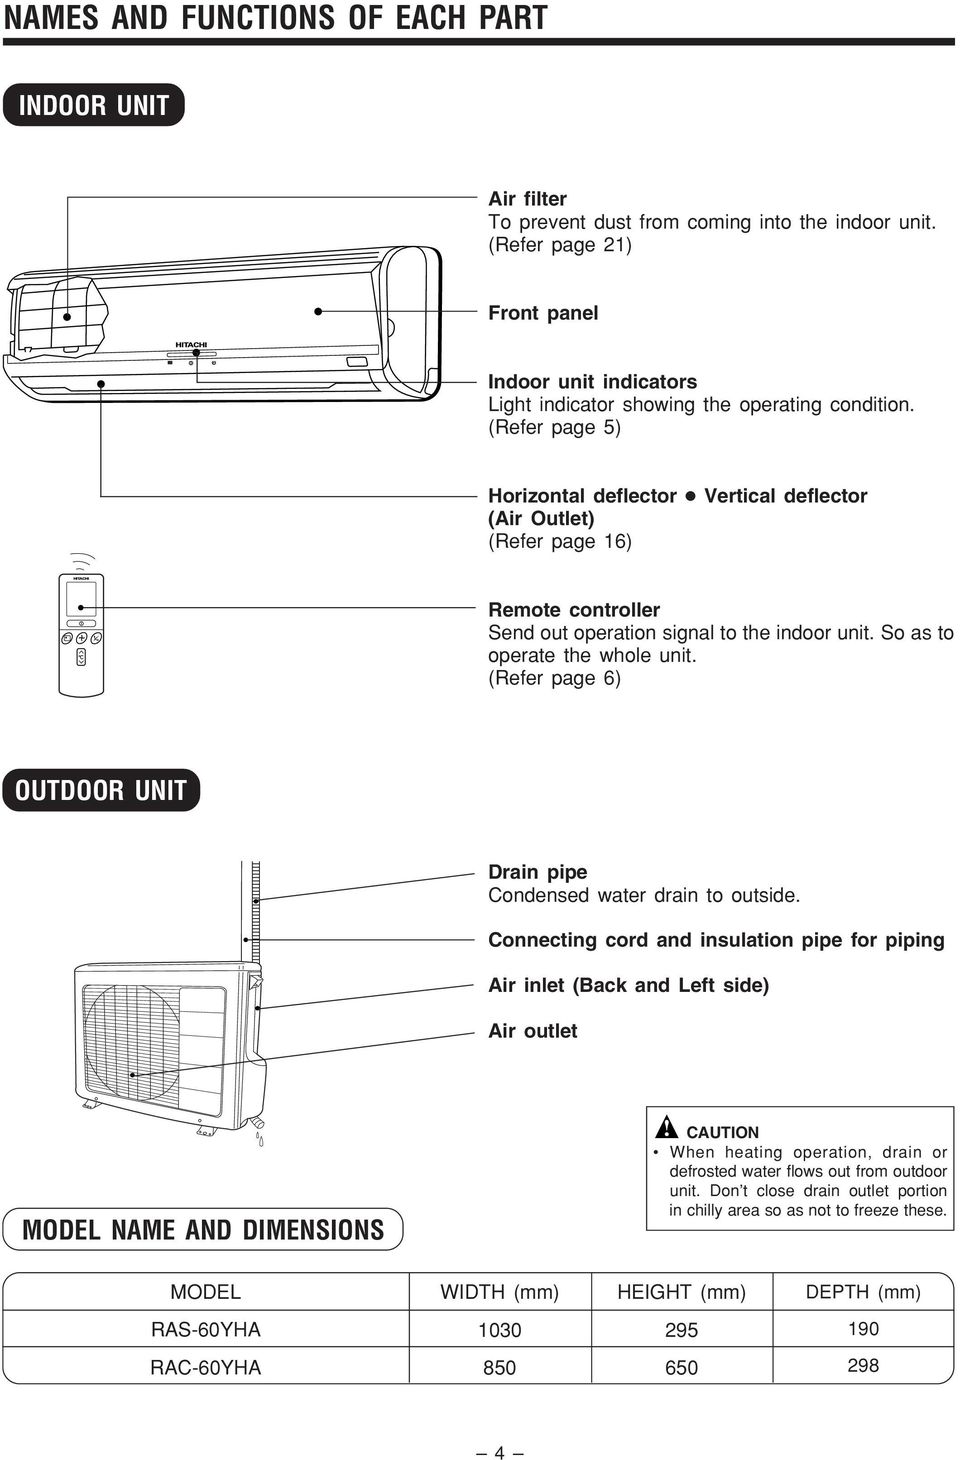 (Refer page 5) Horizontal deflector Vertical deflector (Air Outlet) (Refer page 16) Remote controller Send out operation signal to the indoor unit. So as to operate the whole unit.